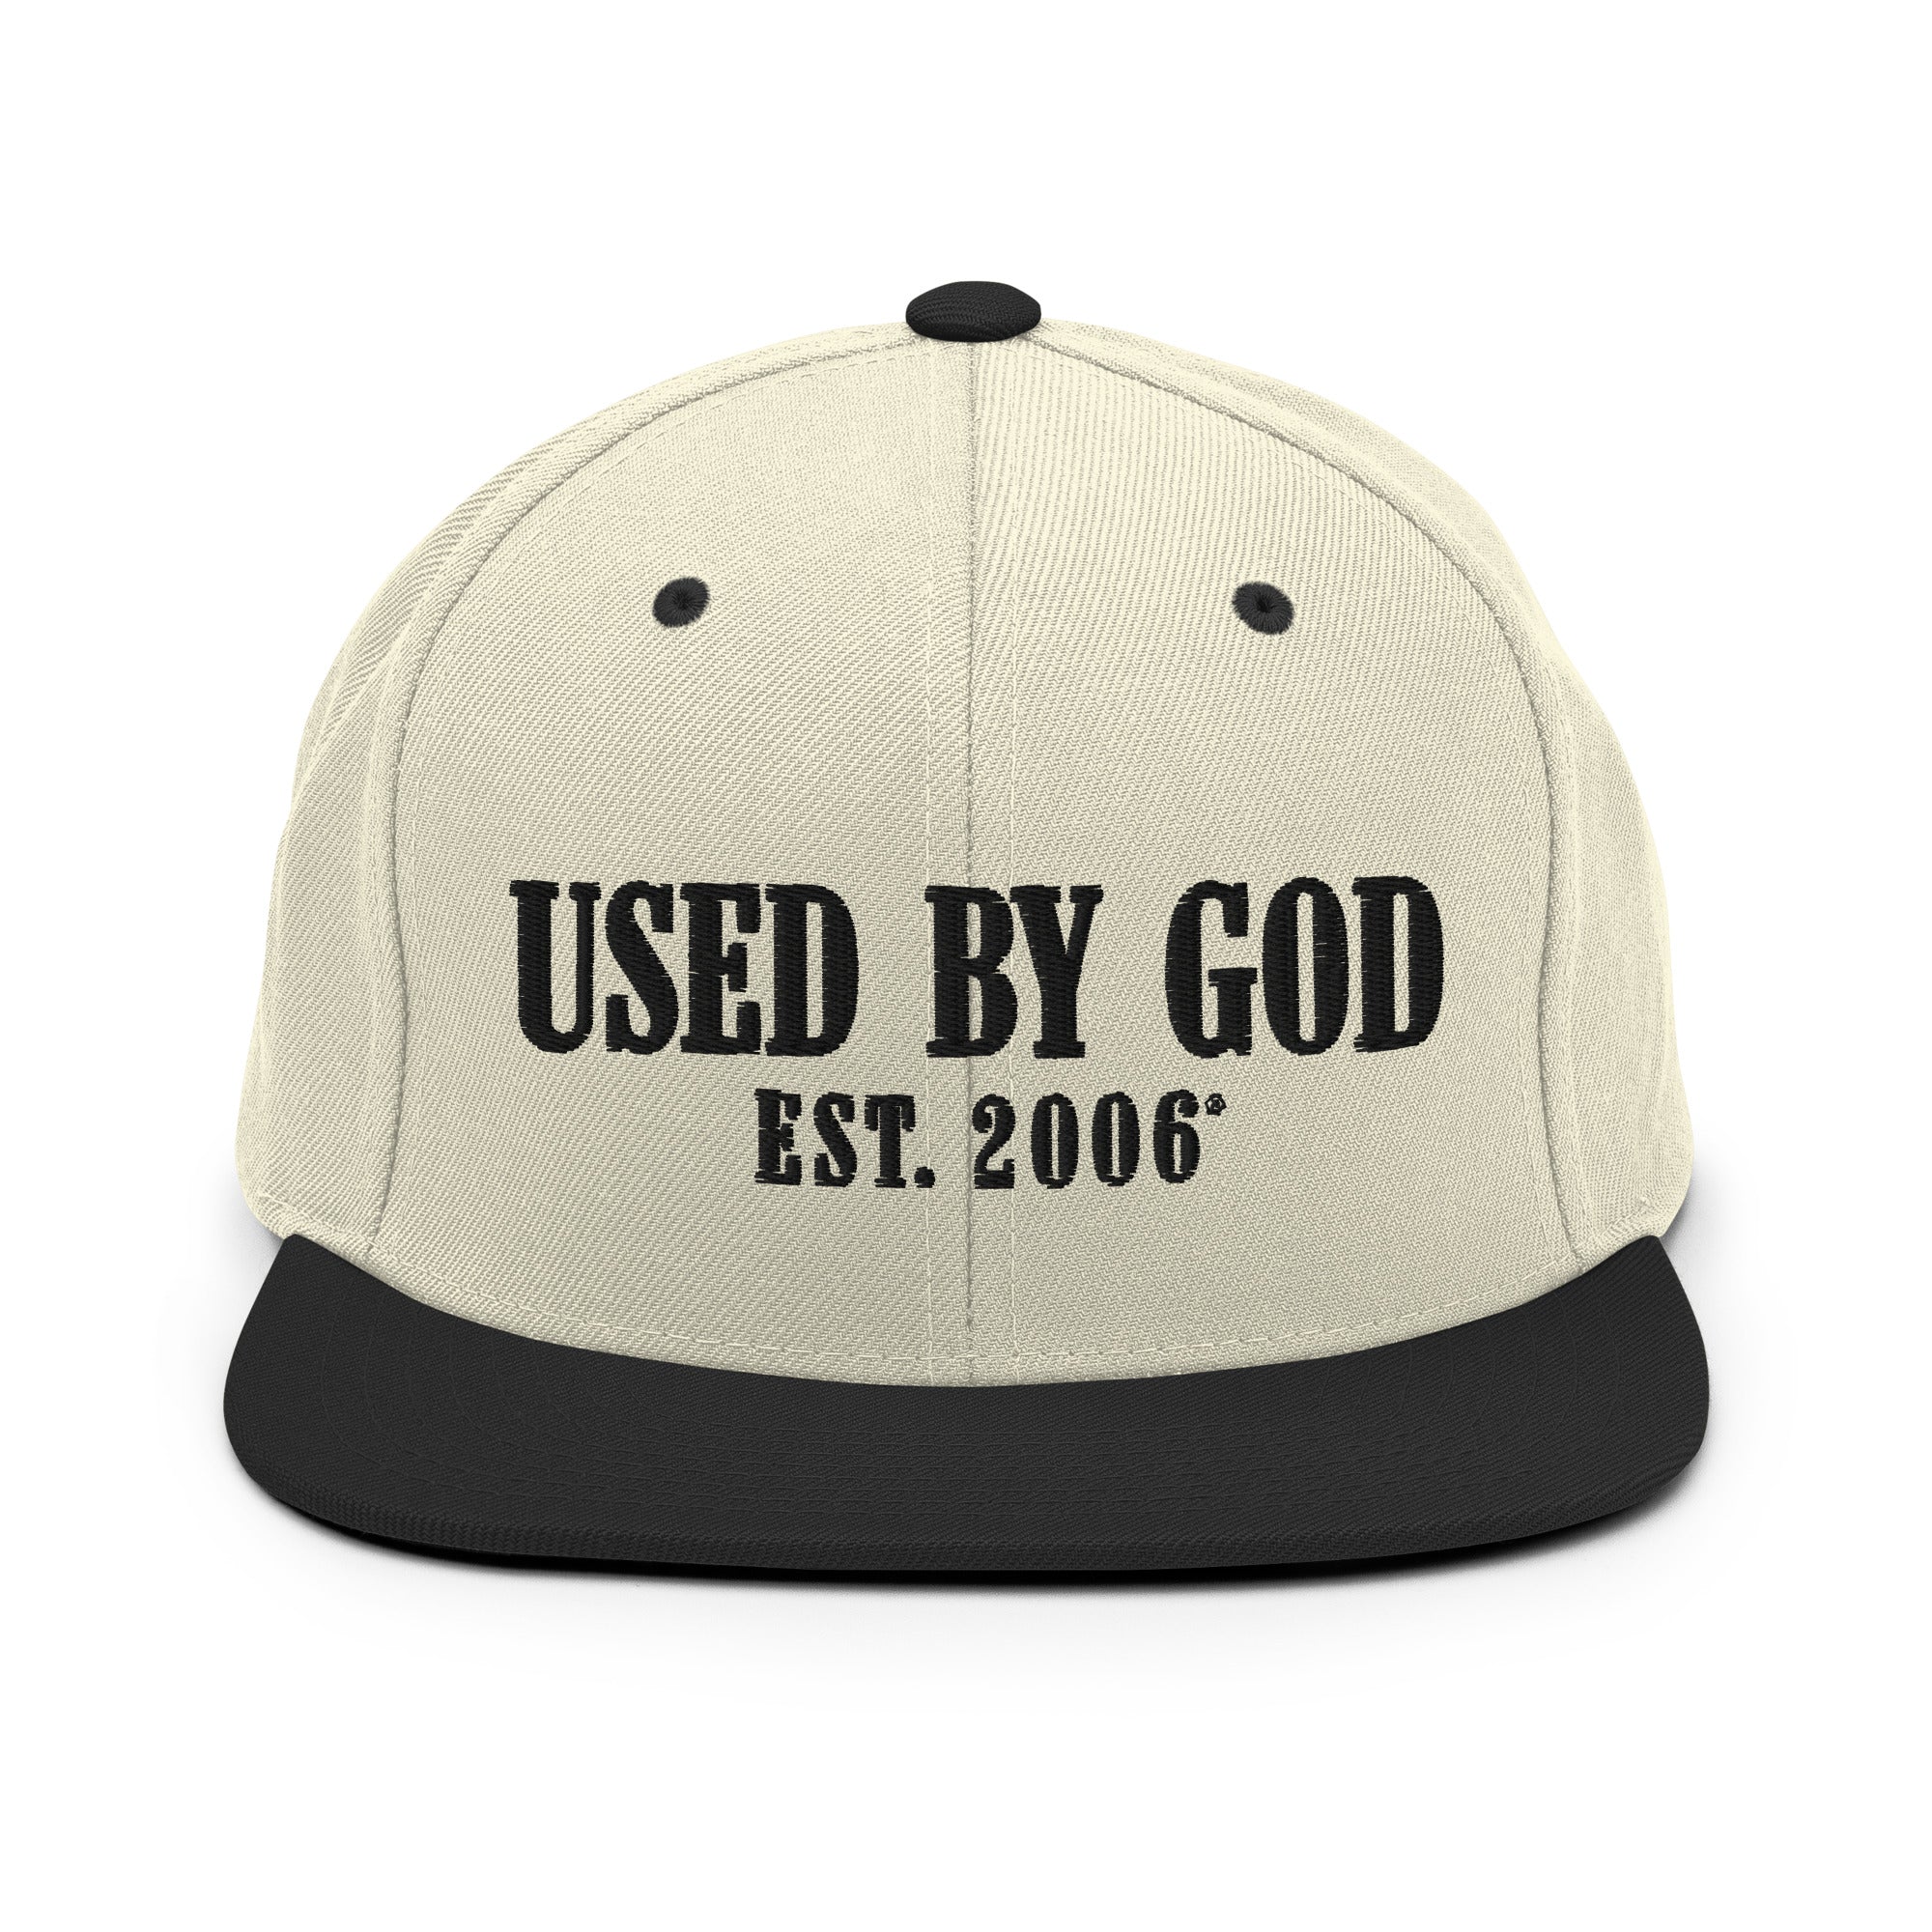 Used By God Est. 2006 Original Snapback Hat, Used By God, Used By God Clothing, Christian Apparel, Christian Hats, Christian T-Shirts, Christian Clothing, God Shirts, Christian Sweatshirts, God Clothing, Jesus Hoodie, Jesus Clothes, God Is Dope, Art Of Homage, Red Letter Clothing, Elevated Faith, Active Faith Sports, Beacon Threads, God The Father Apparel